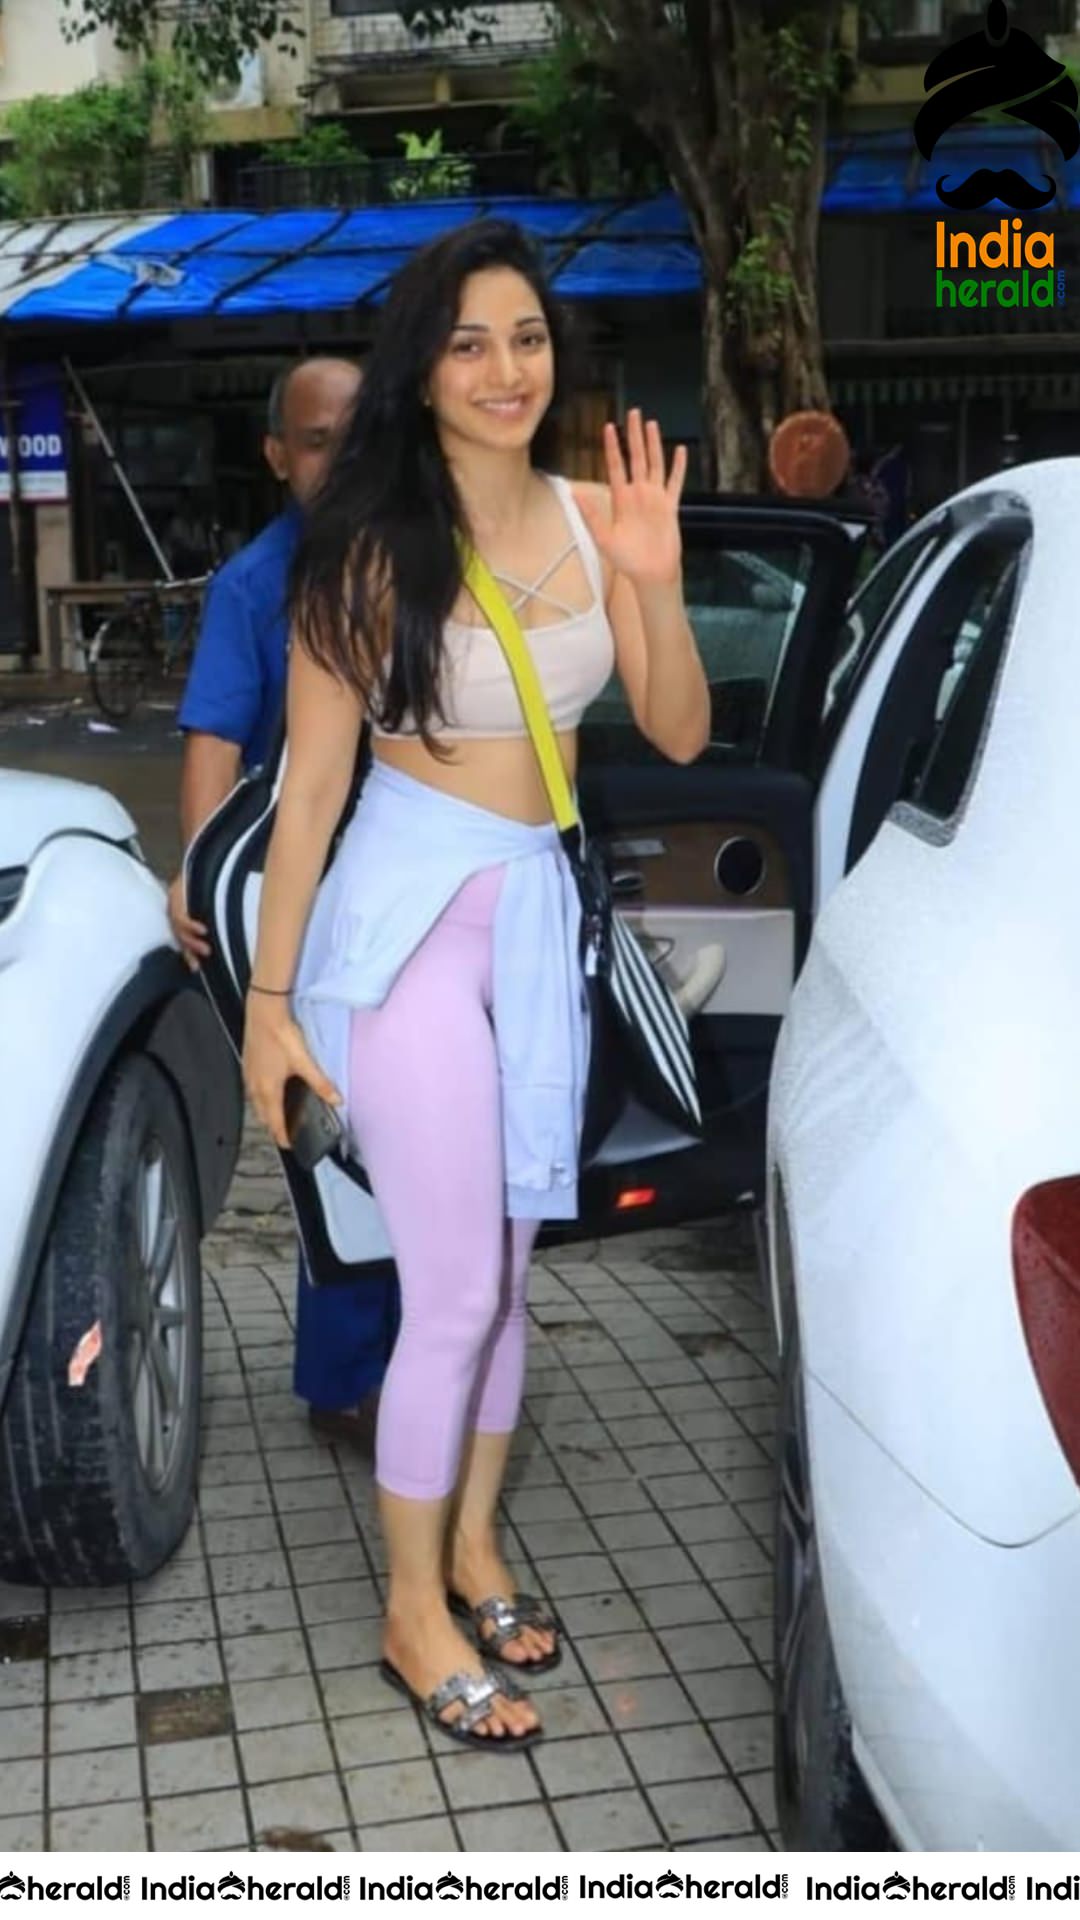 Kiara Advani Shows her Hotness by wearing Sports Bra while going to Pilates Class